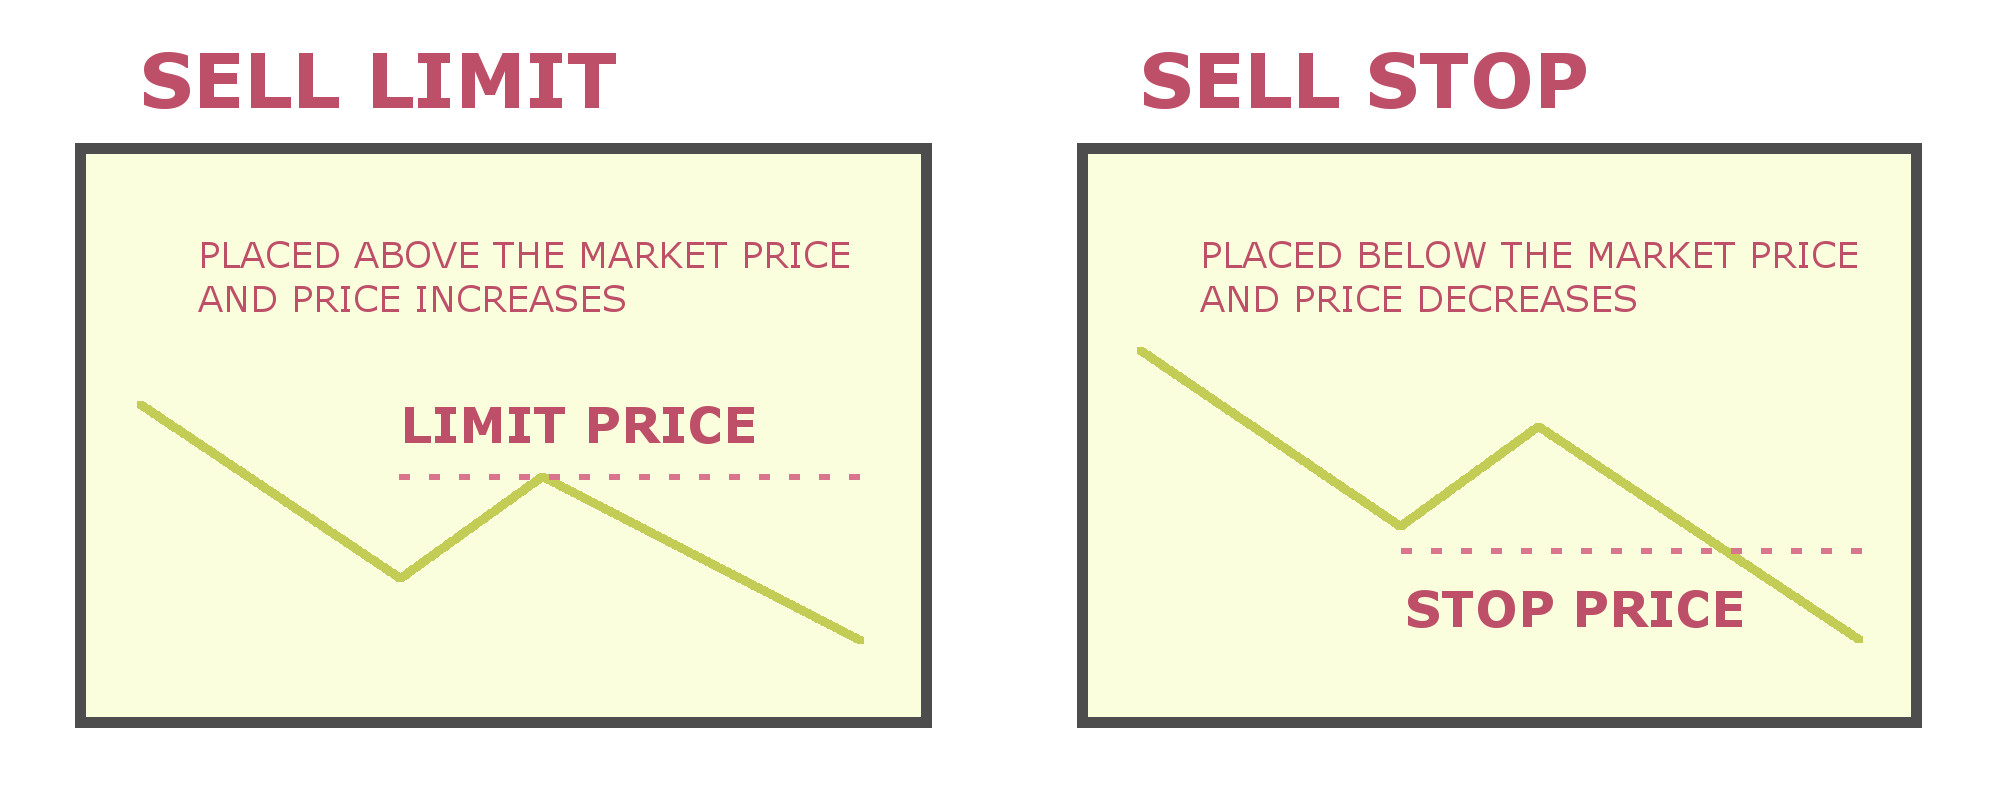 Sell Limit vs. Sell Stop - Trader Group